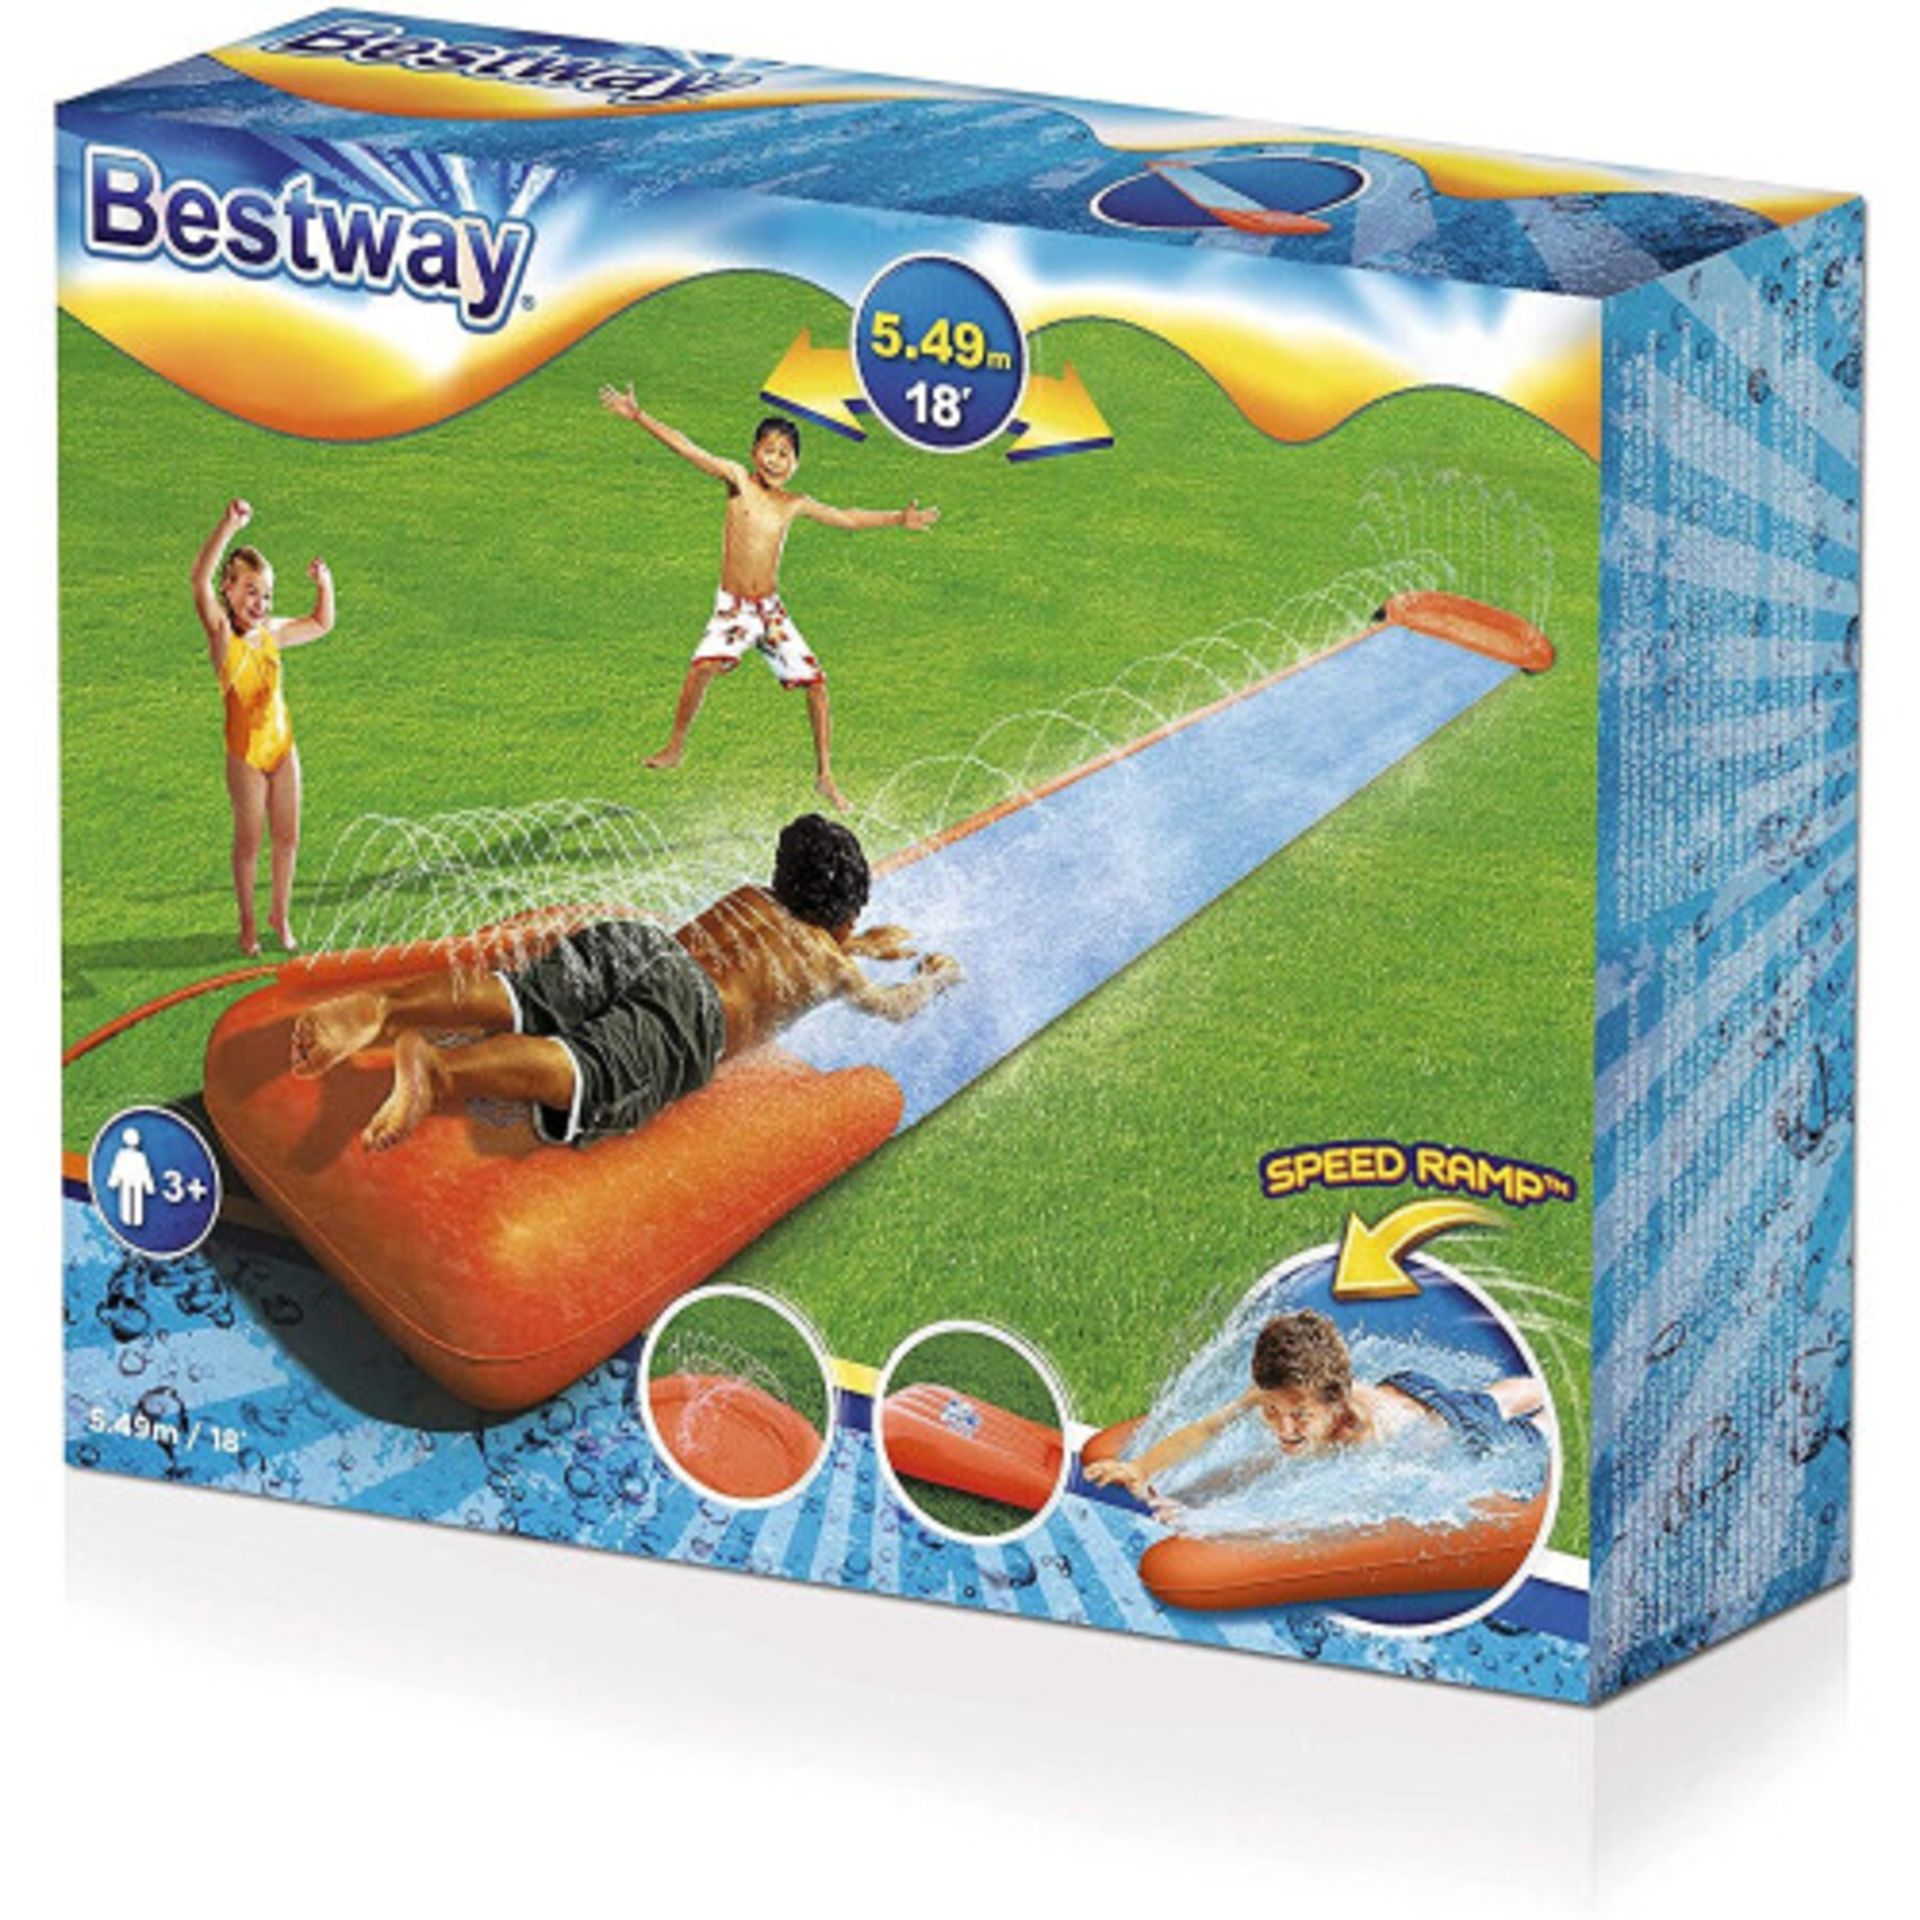 8 X BRAND NEW BESTWAY SINGLE SLIP AND SLIDE WITH INFLATABLE SPEED RAMP - DRENCH POOL AND